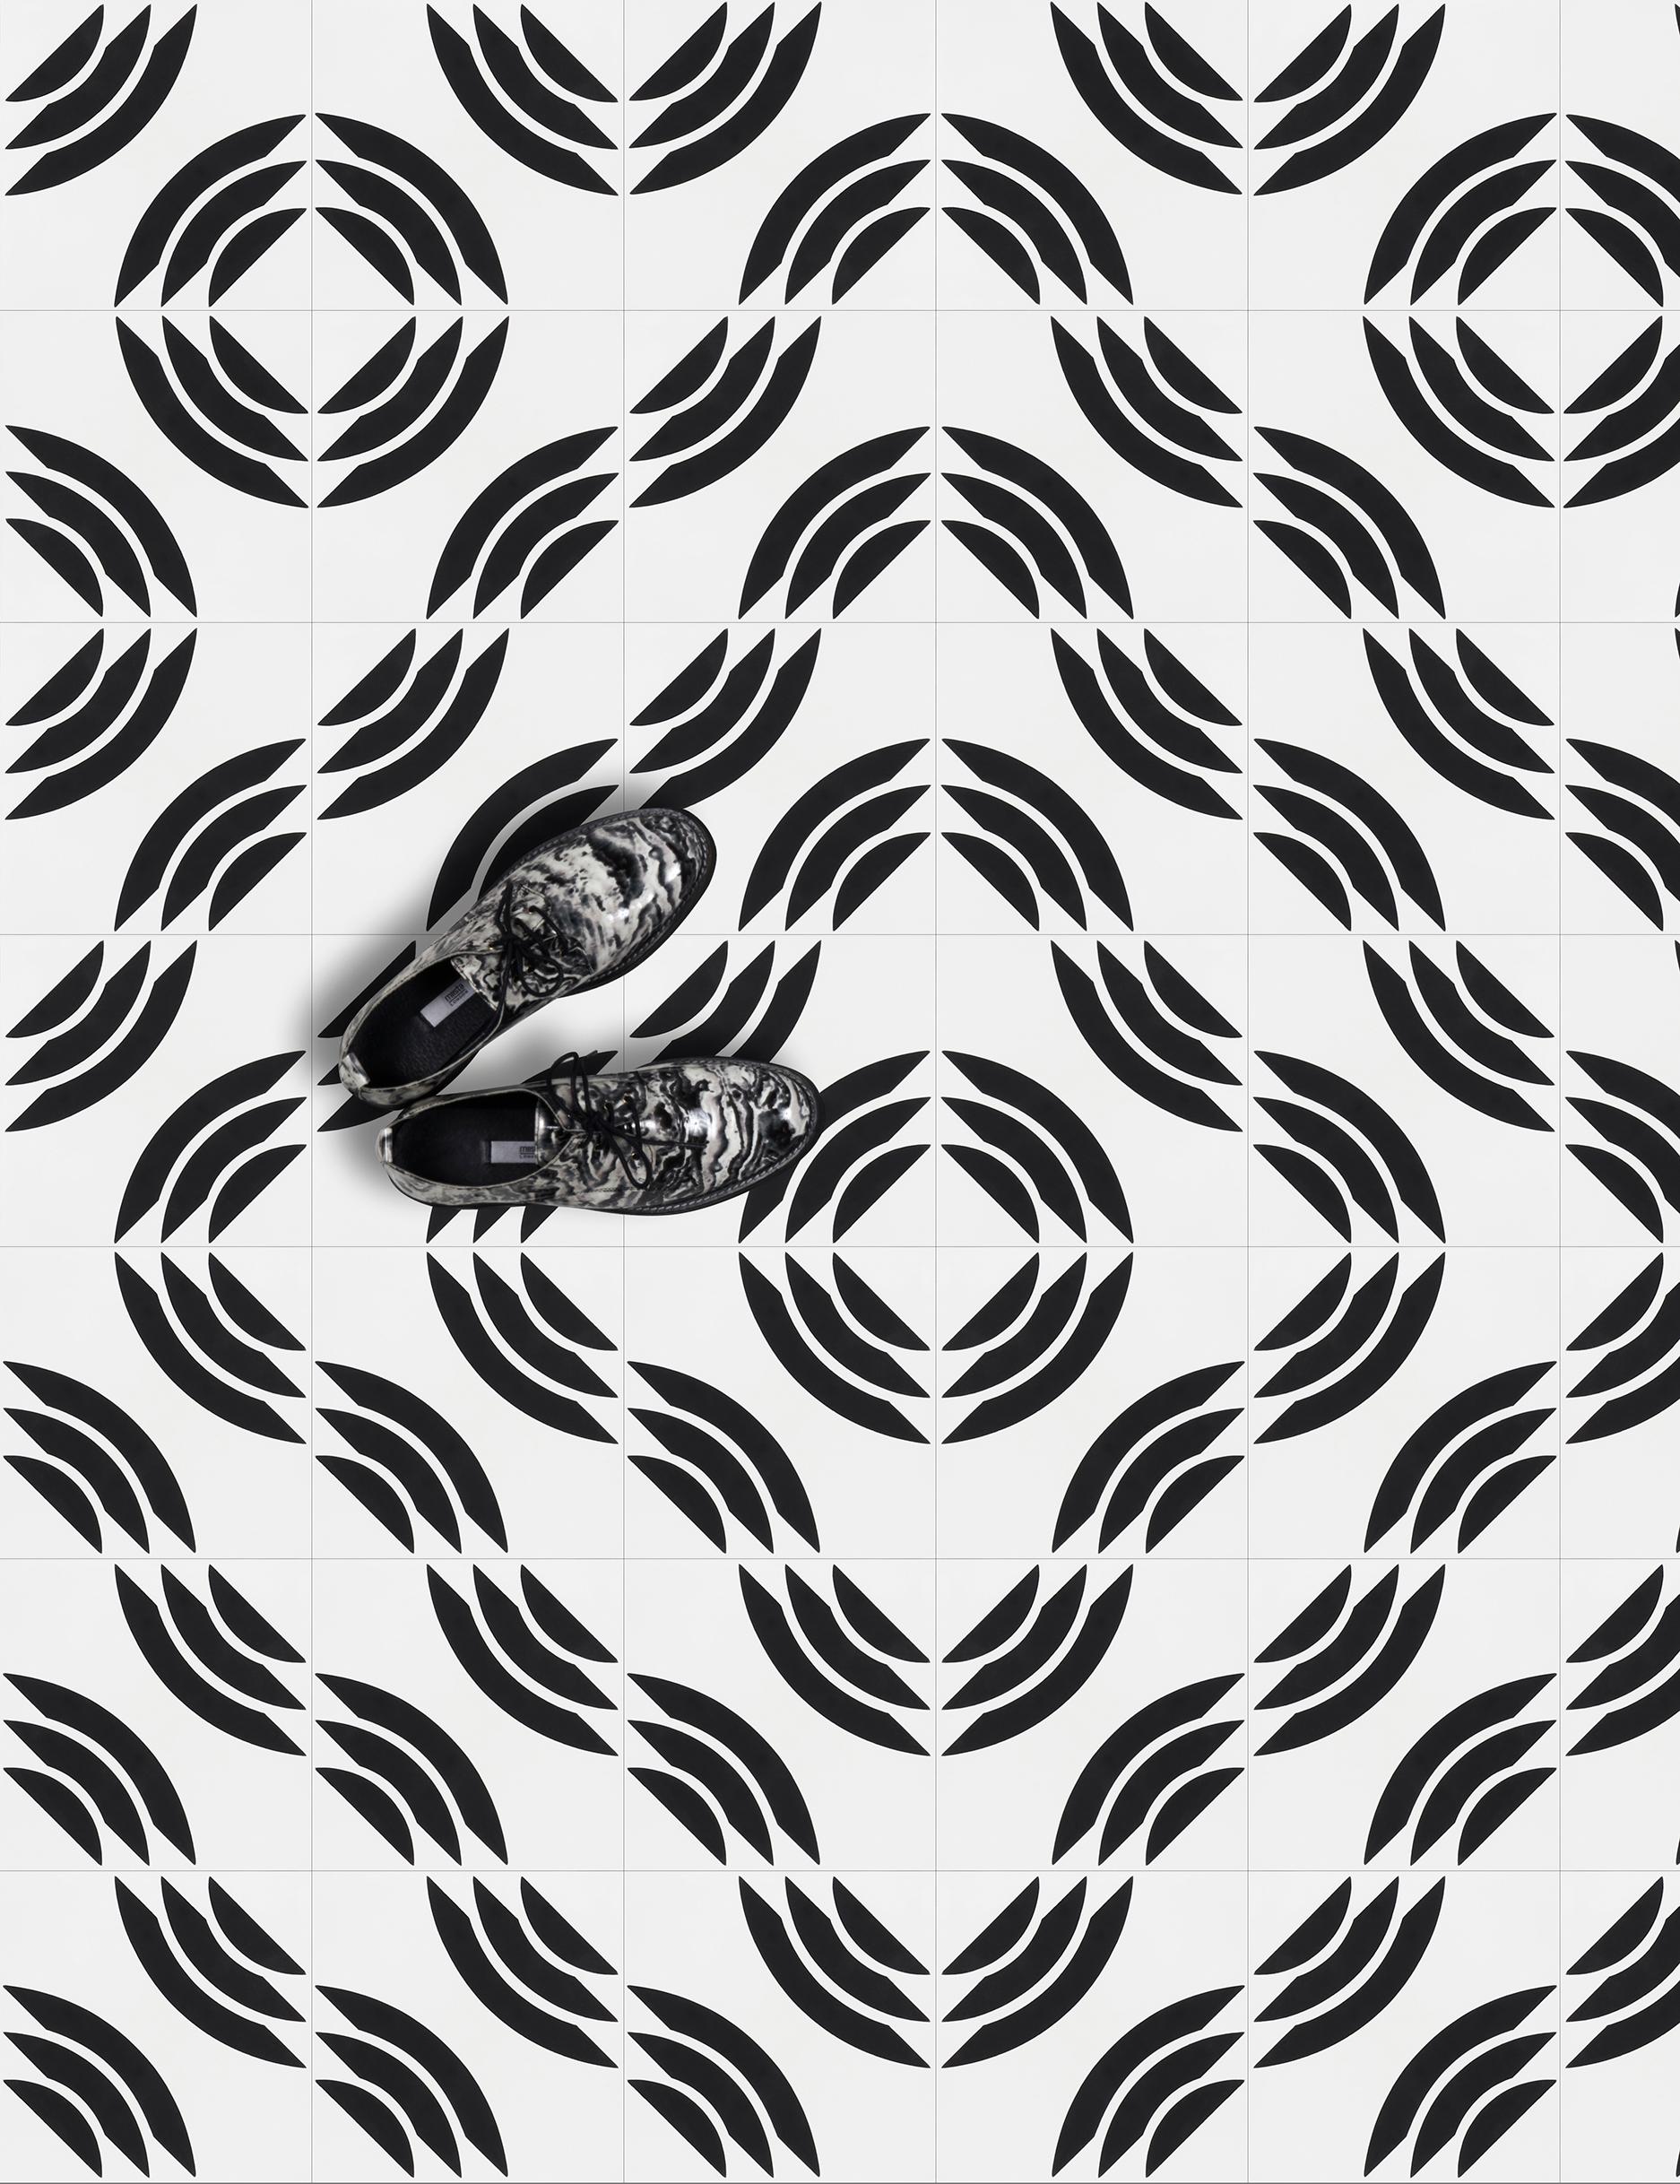 A snakelike shape that twists and turns to form an infinite range of winding patterns for your surface.

Cement Tiles
Type: Encaustic cement tile
Production process: Hydraulic pressing process
Materials: White cement, stone powder, additives, grey